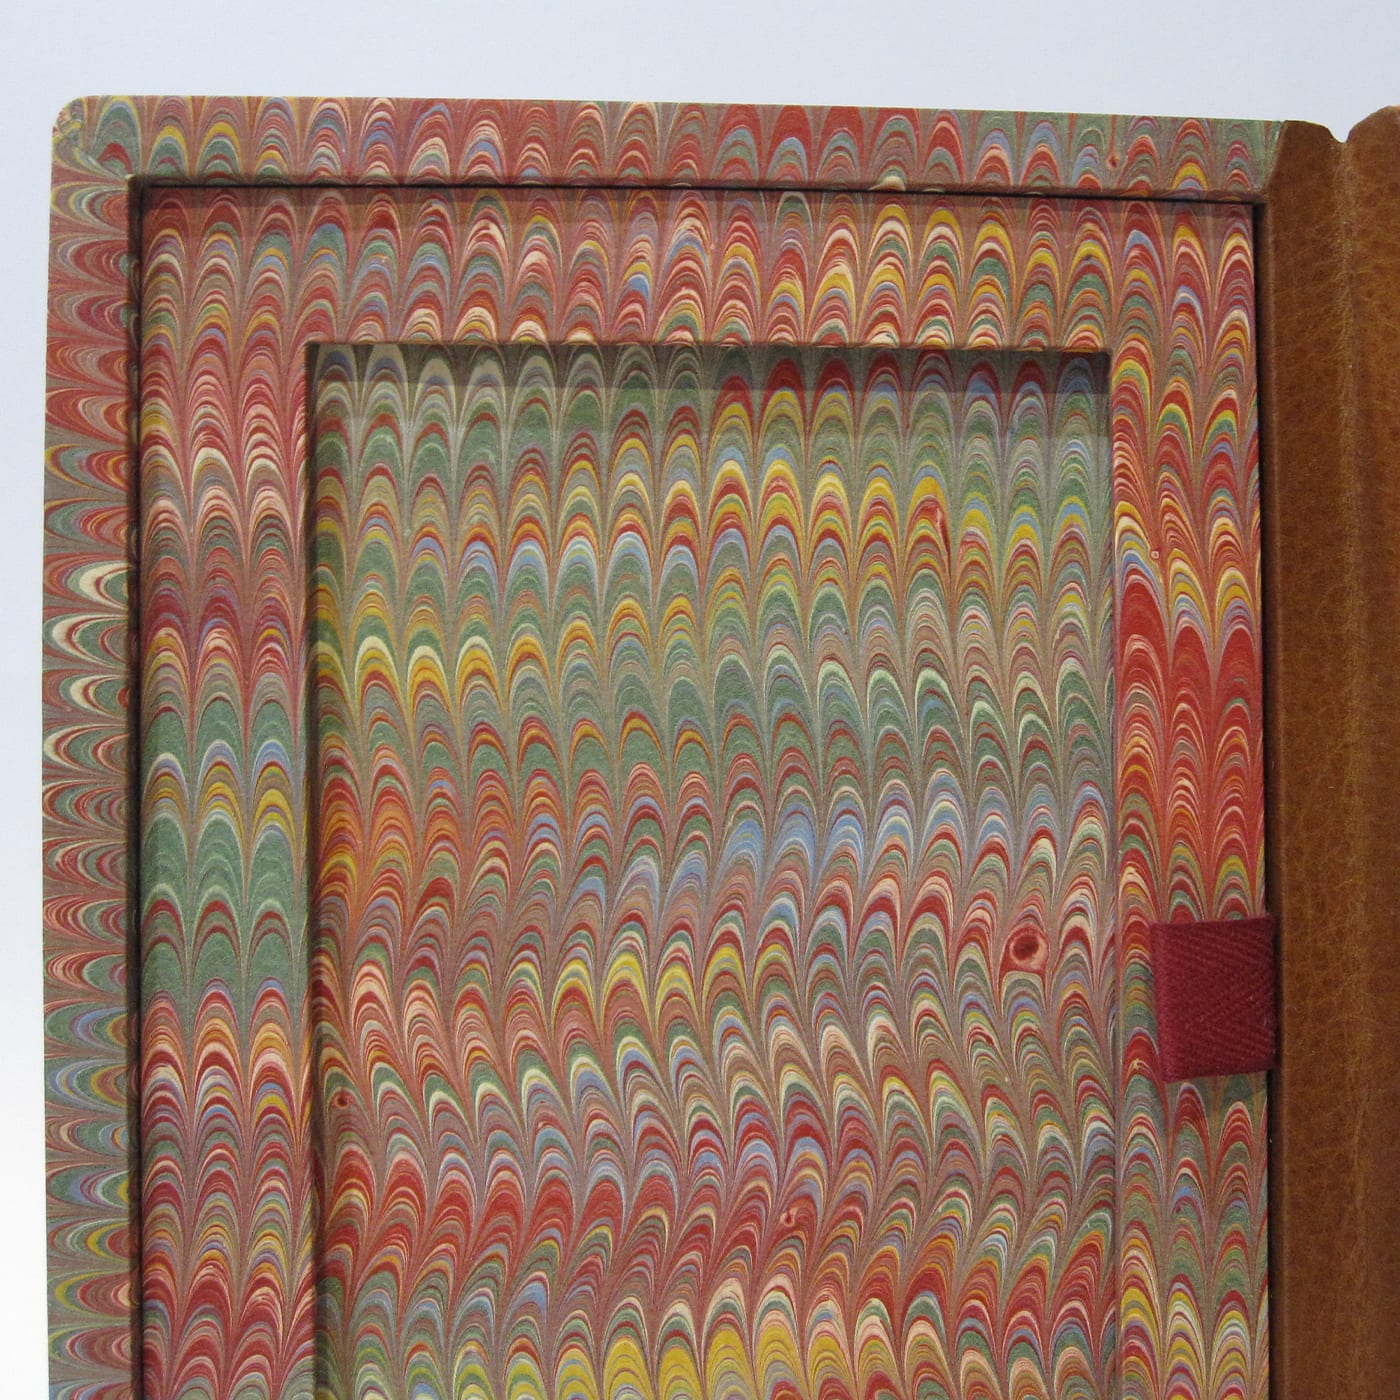 Multi-Colored Marbled Photo Frame - AtelierGK Firenze